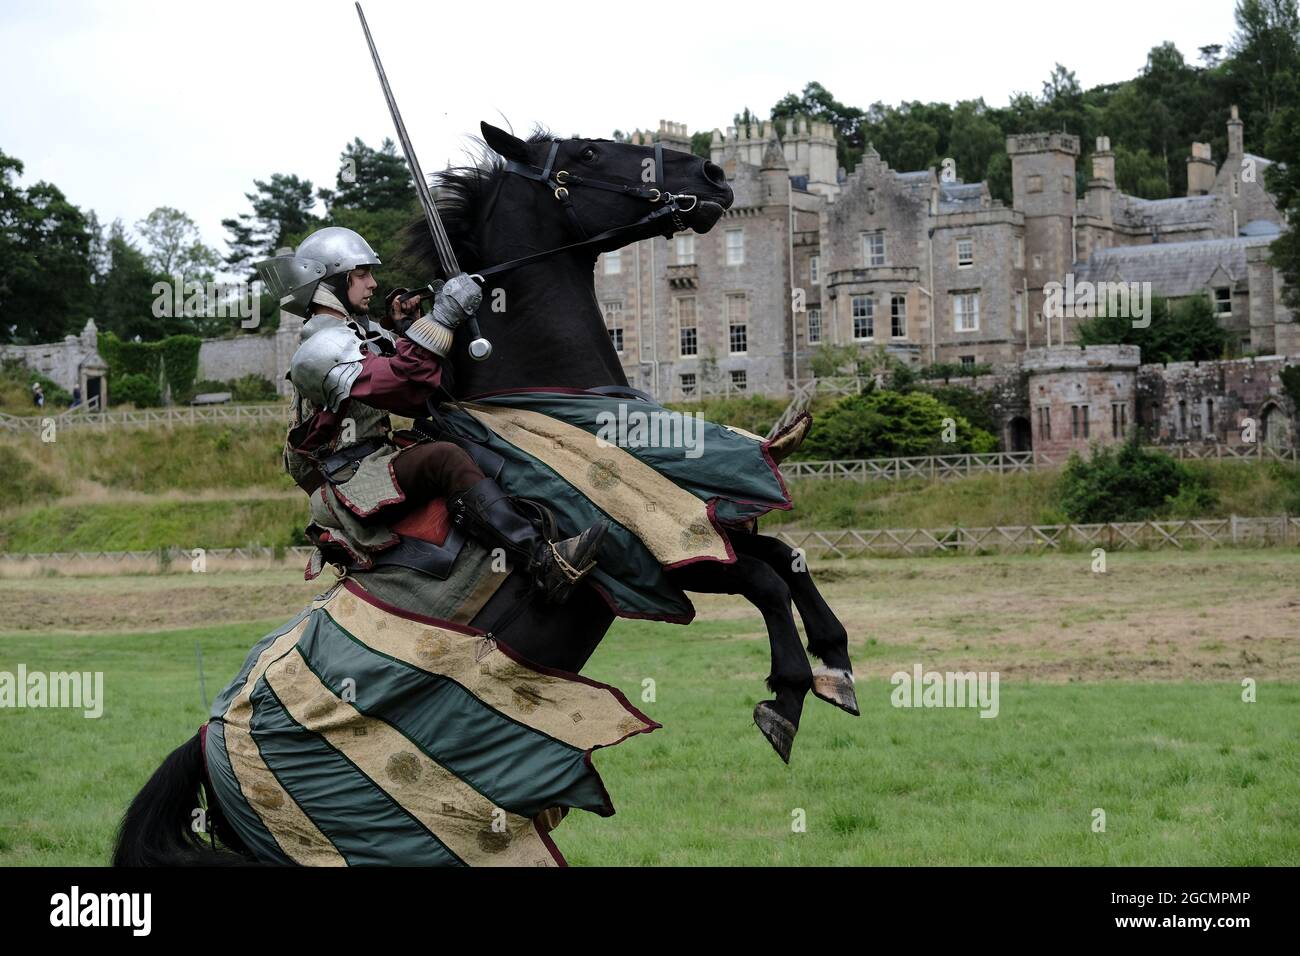 Melrose Uk 9 August 21 Photocall For Scottfest 21 At Abbotsford House Melrose Scotlandos Fascinating History Stimulating Literature And Vibrant Culture Will Be Celebrated Every Year With Scottfest A Major New Annual